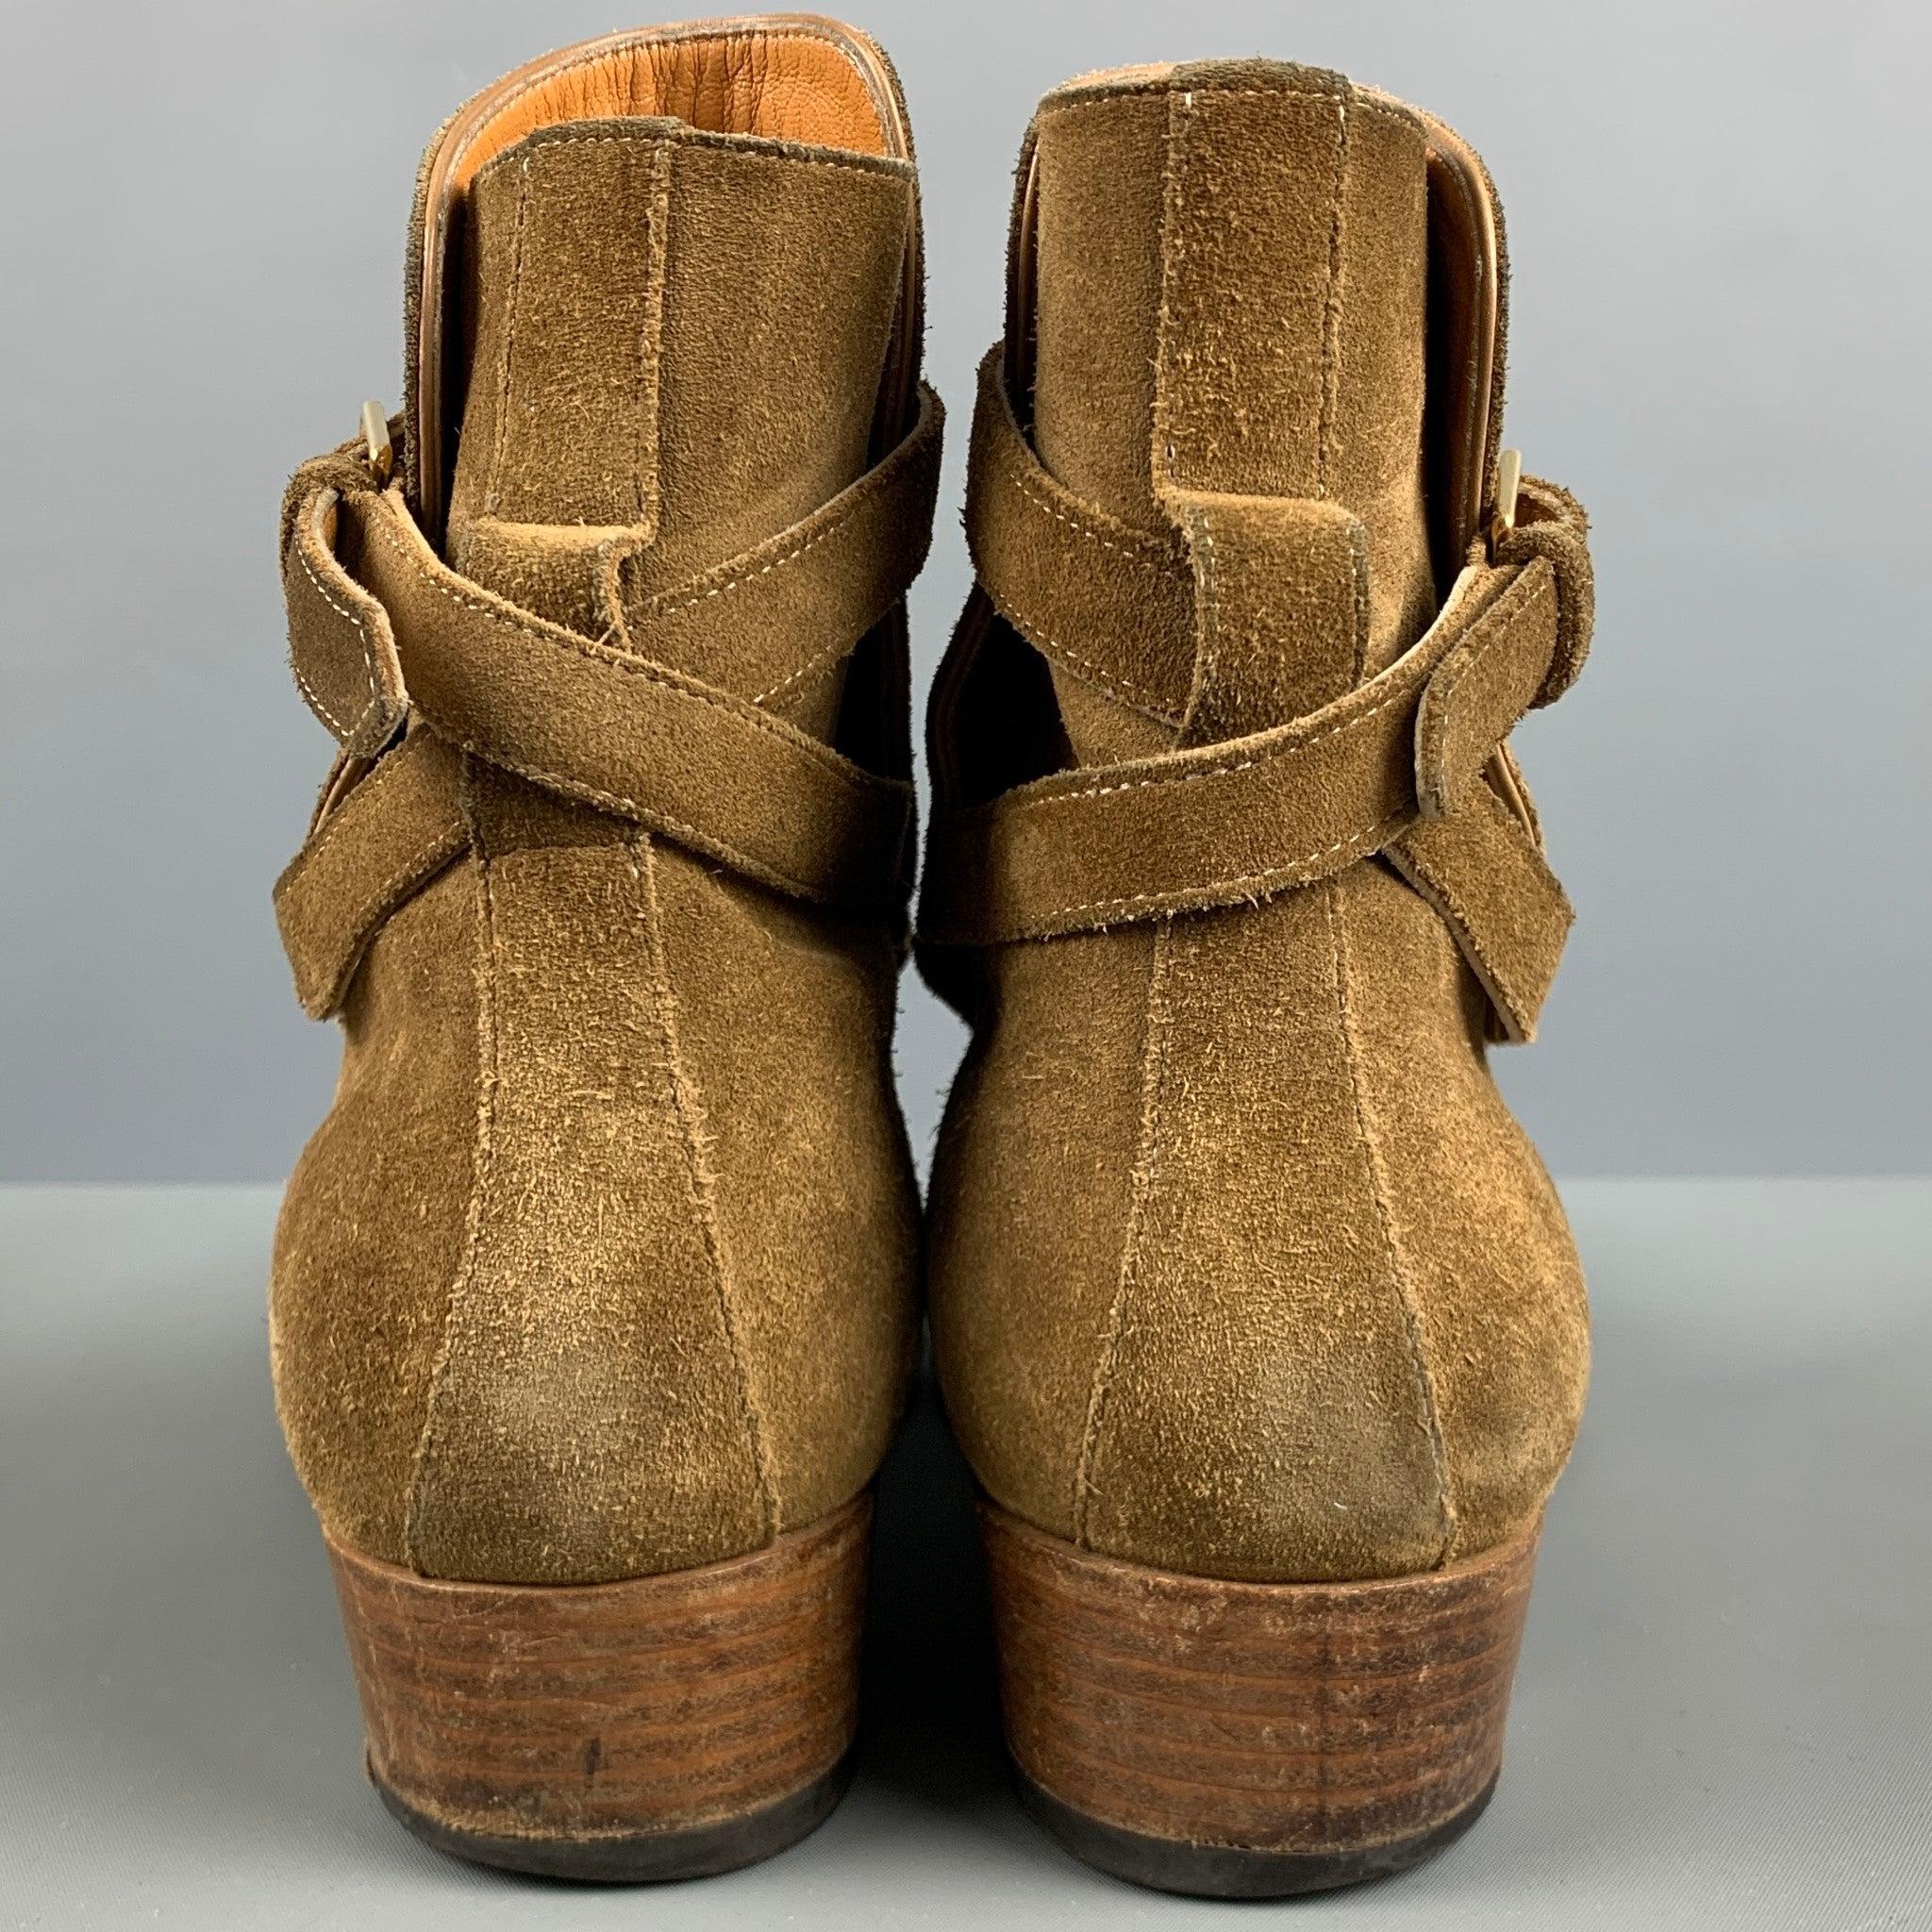 SAINT LAURENT Size 7 Tan Solid Leather Ankle Boots In Good Condition For Sale In San Francisco, CA